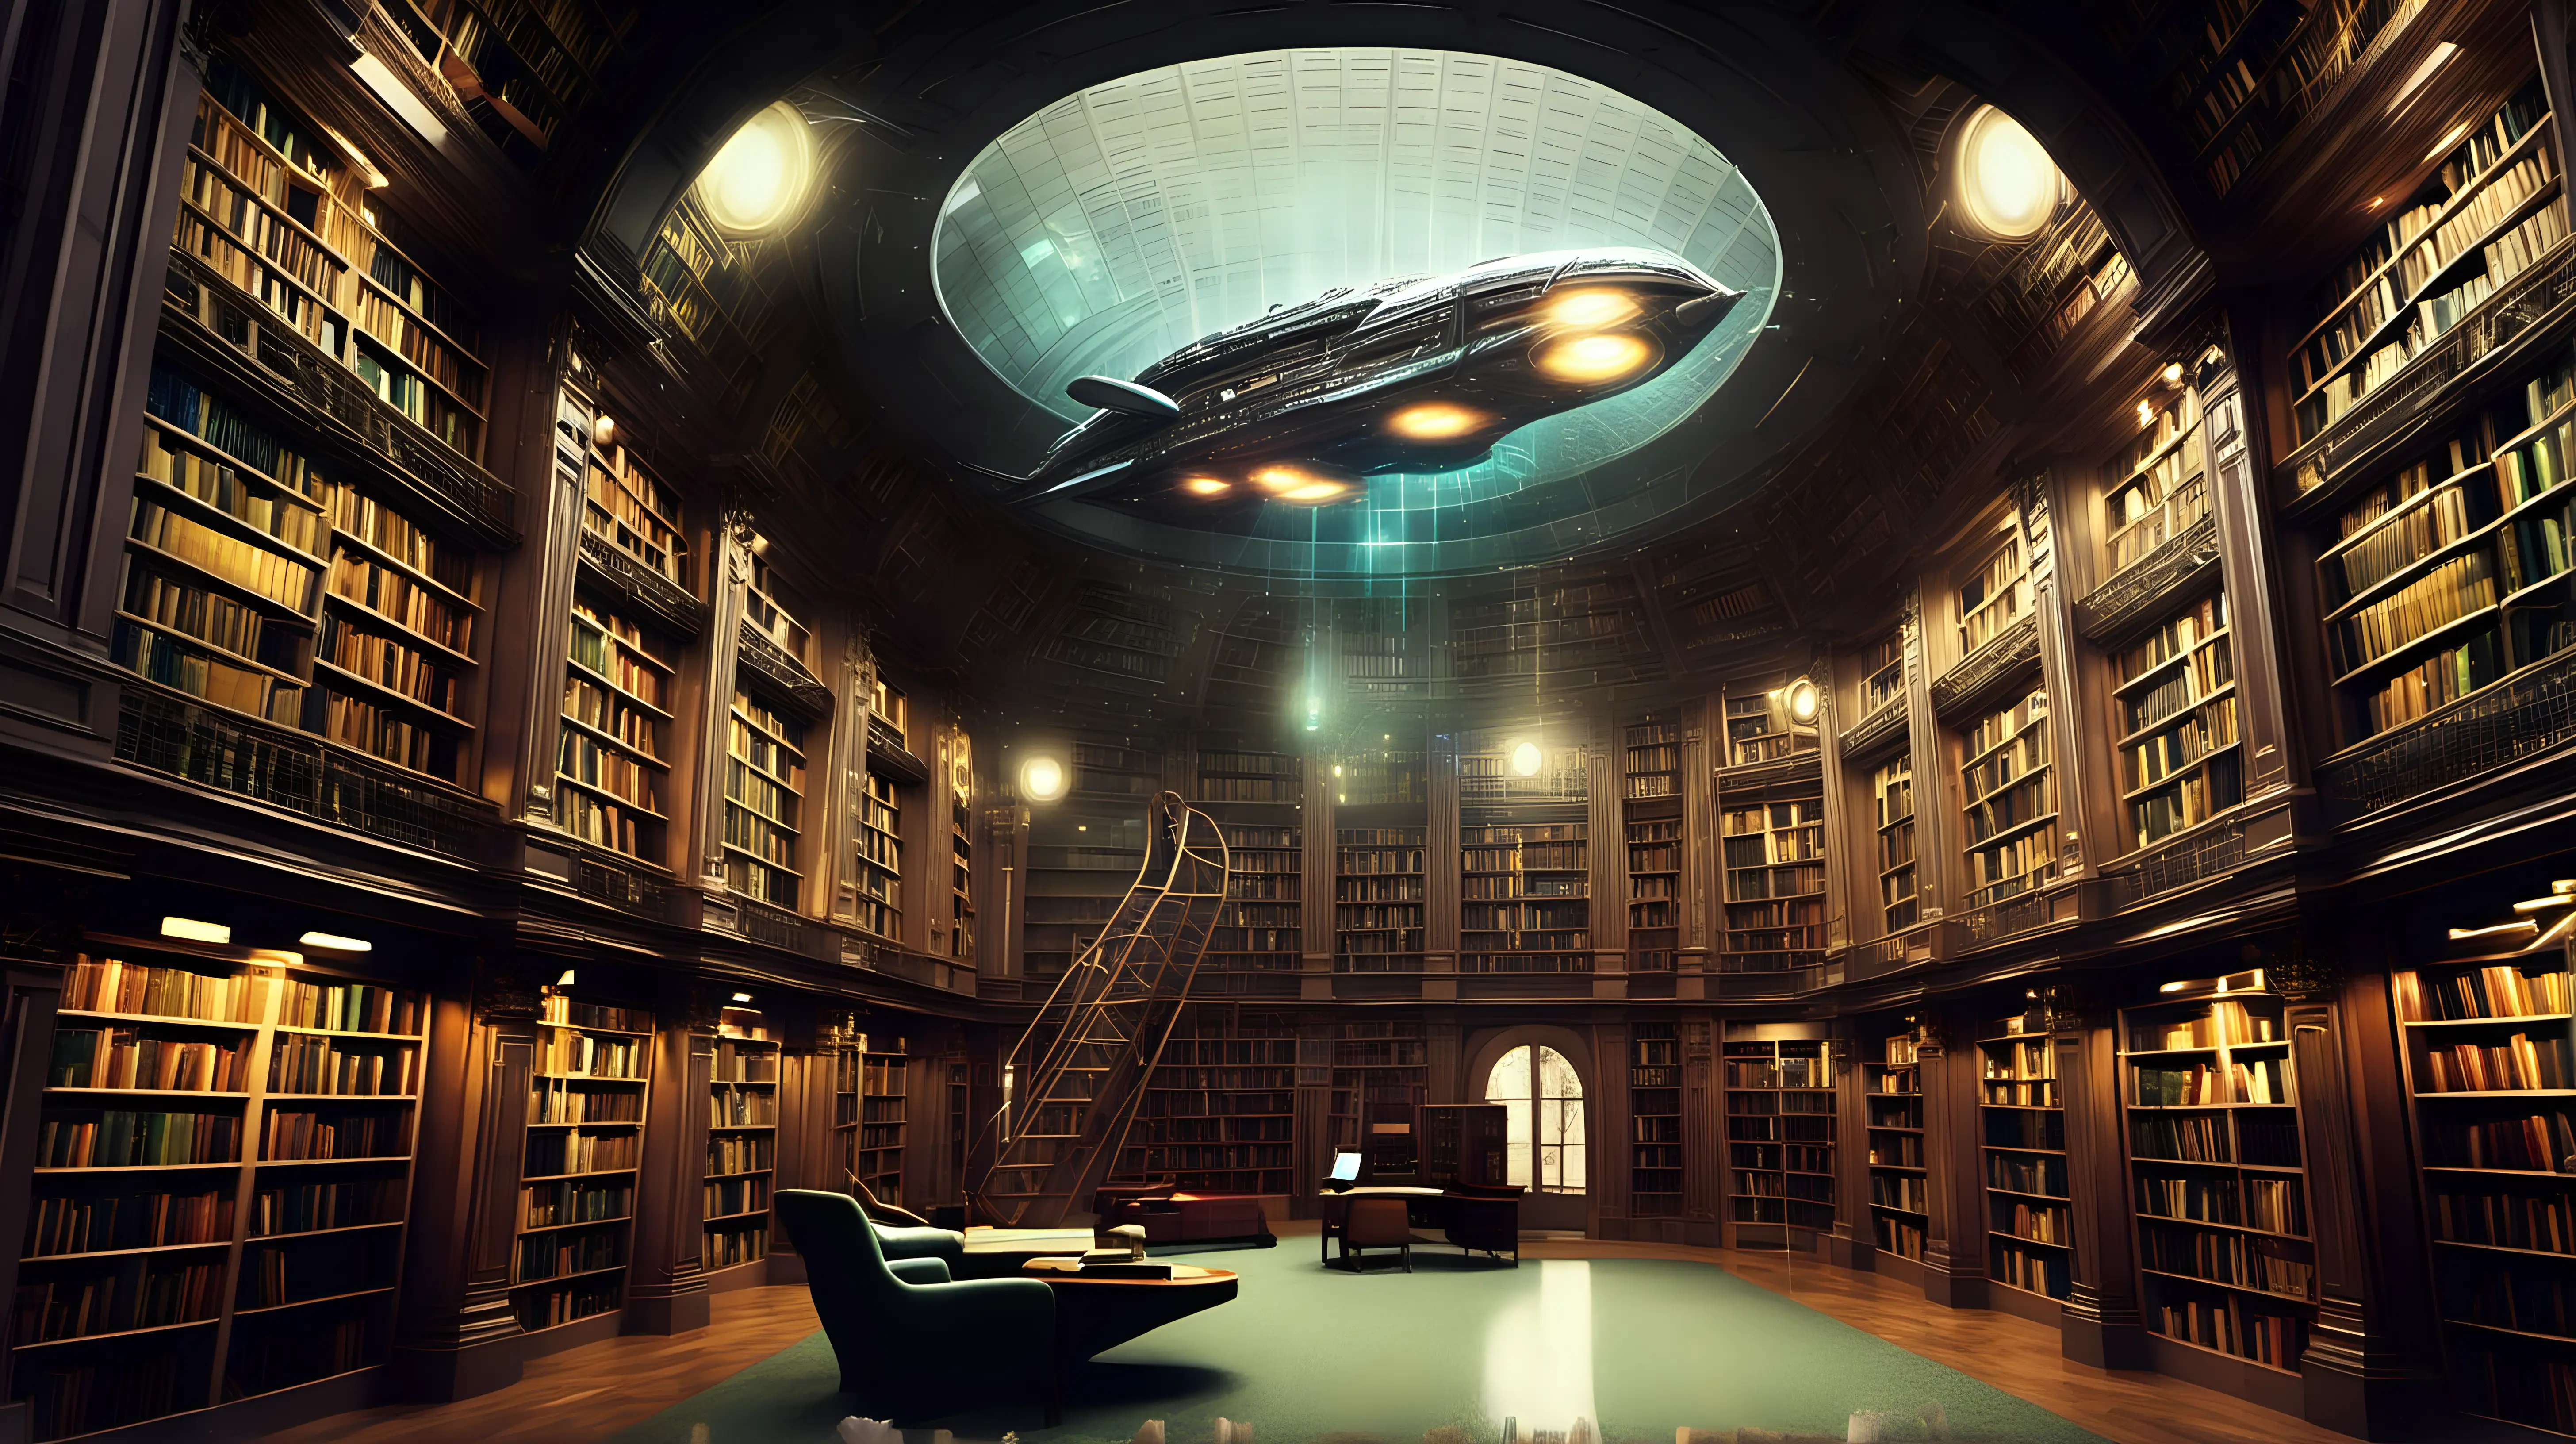 An old library with a time machine spaceship in it